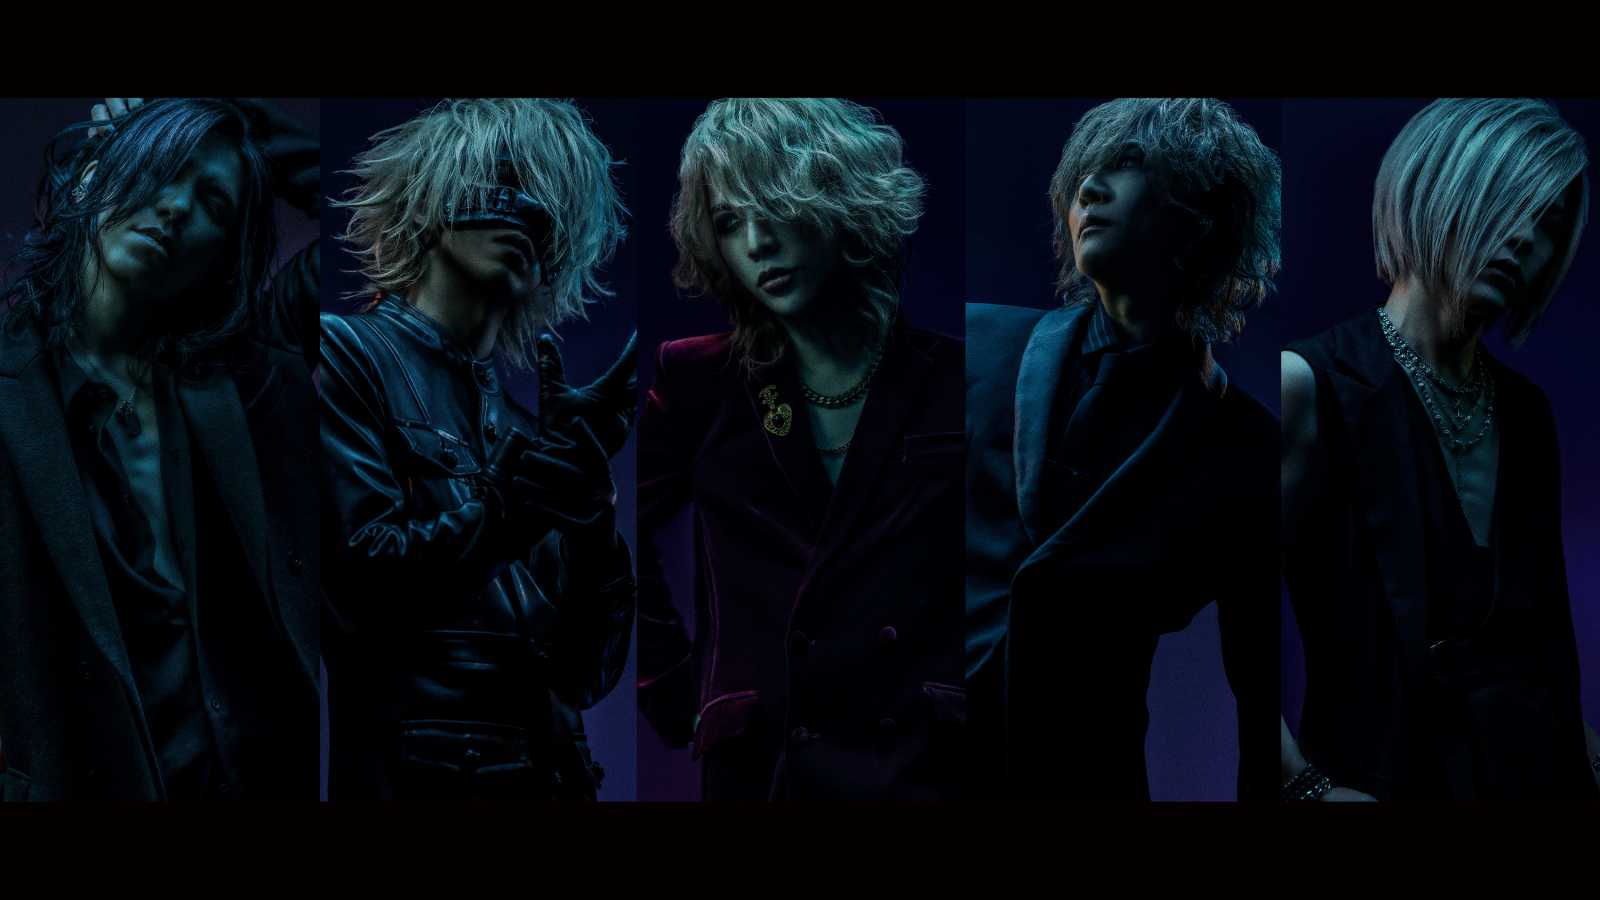 the GazettE chegou ao Crunchyroll © Sony Music Entertainment (Japan). All rights reserved.